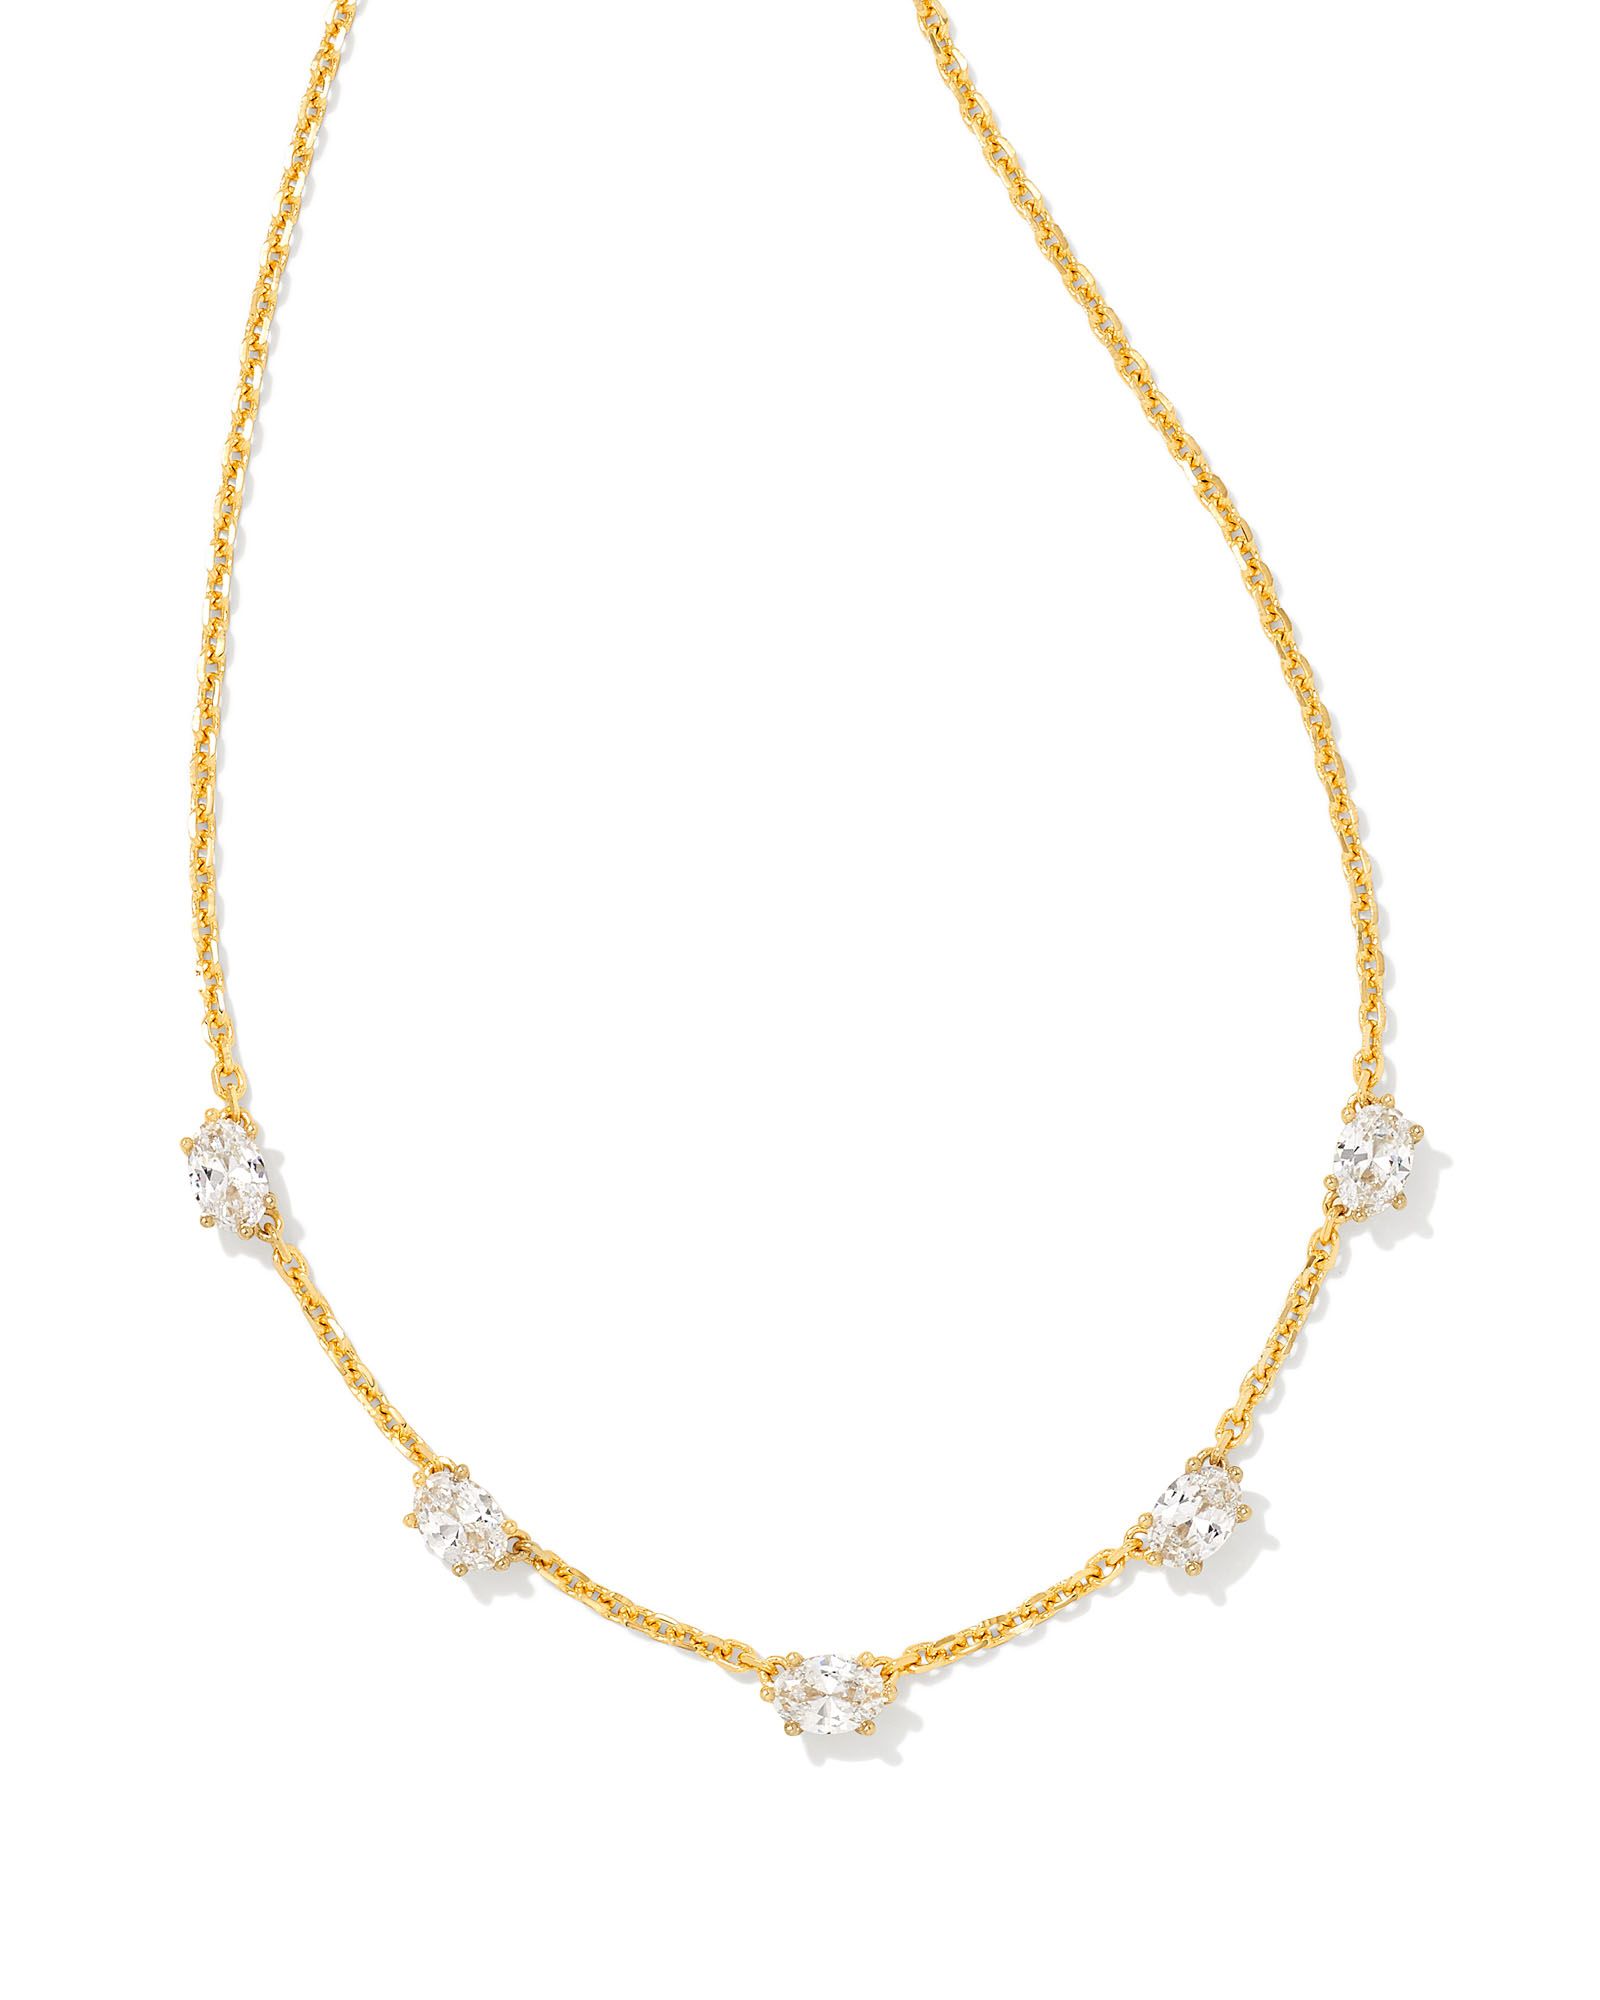 Cailin Gold Crystal Strand Necklace in White Crystal | Kendra Scott